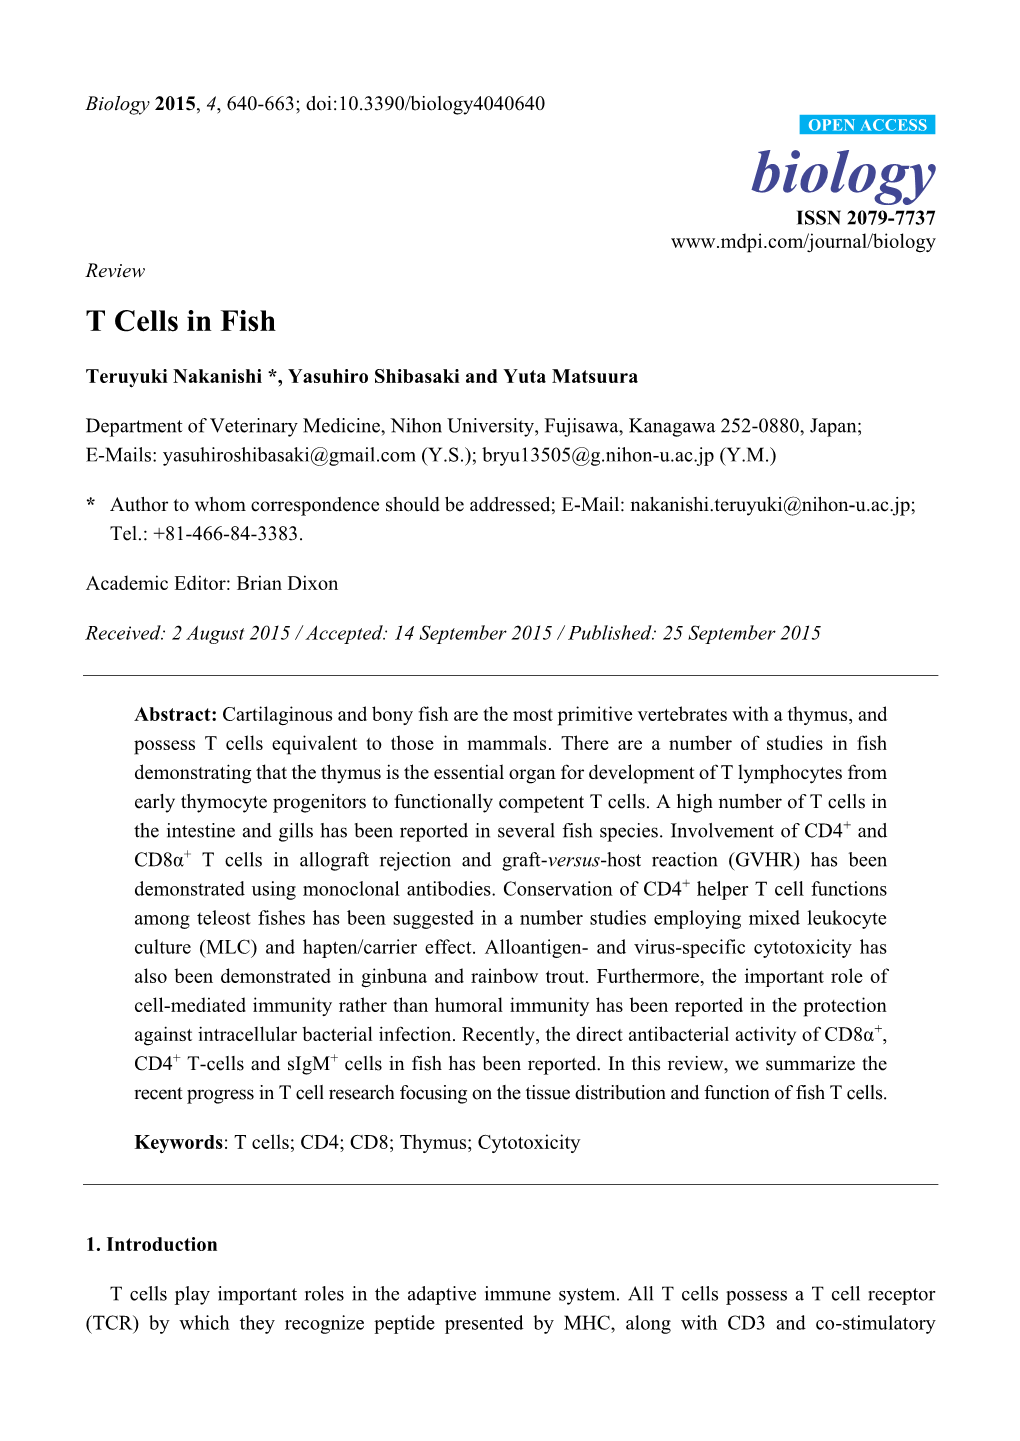 T Cells in Fish